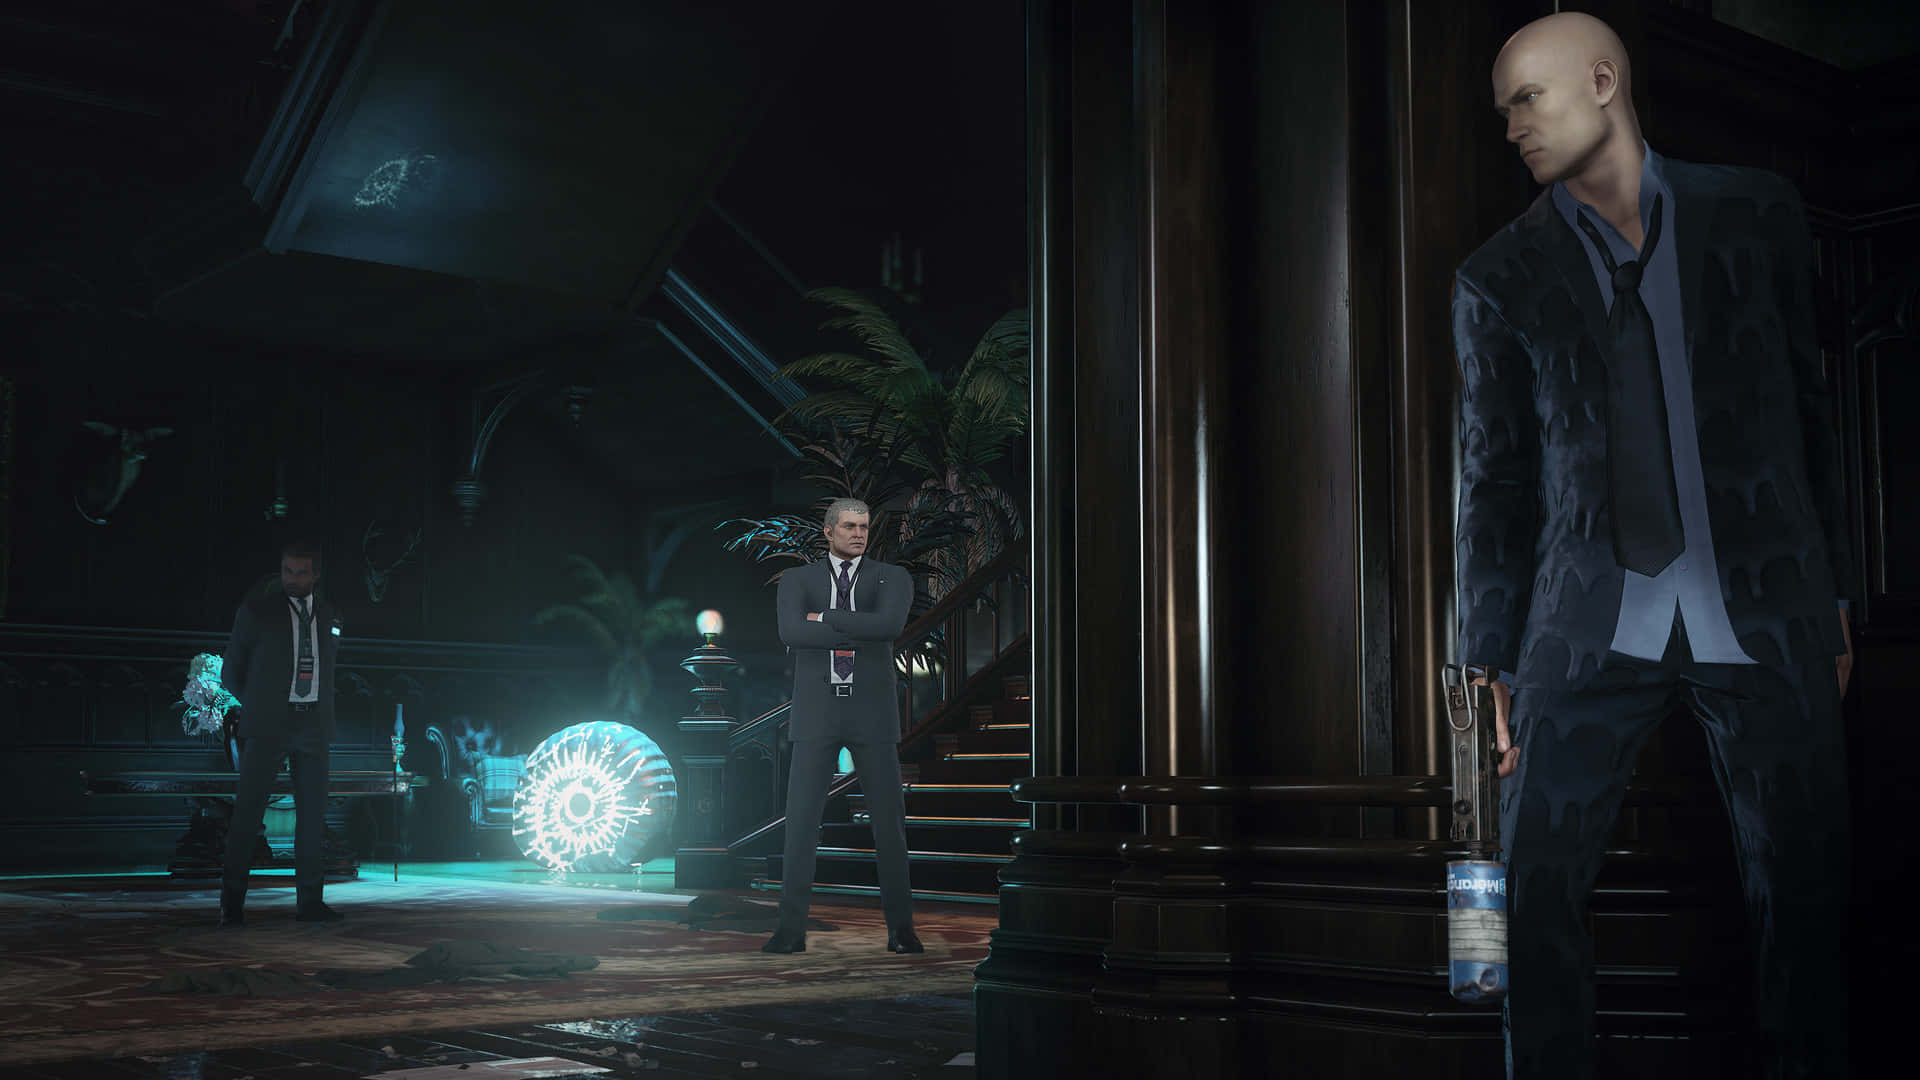 Master the world of assassination with Hitman 2.